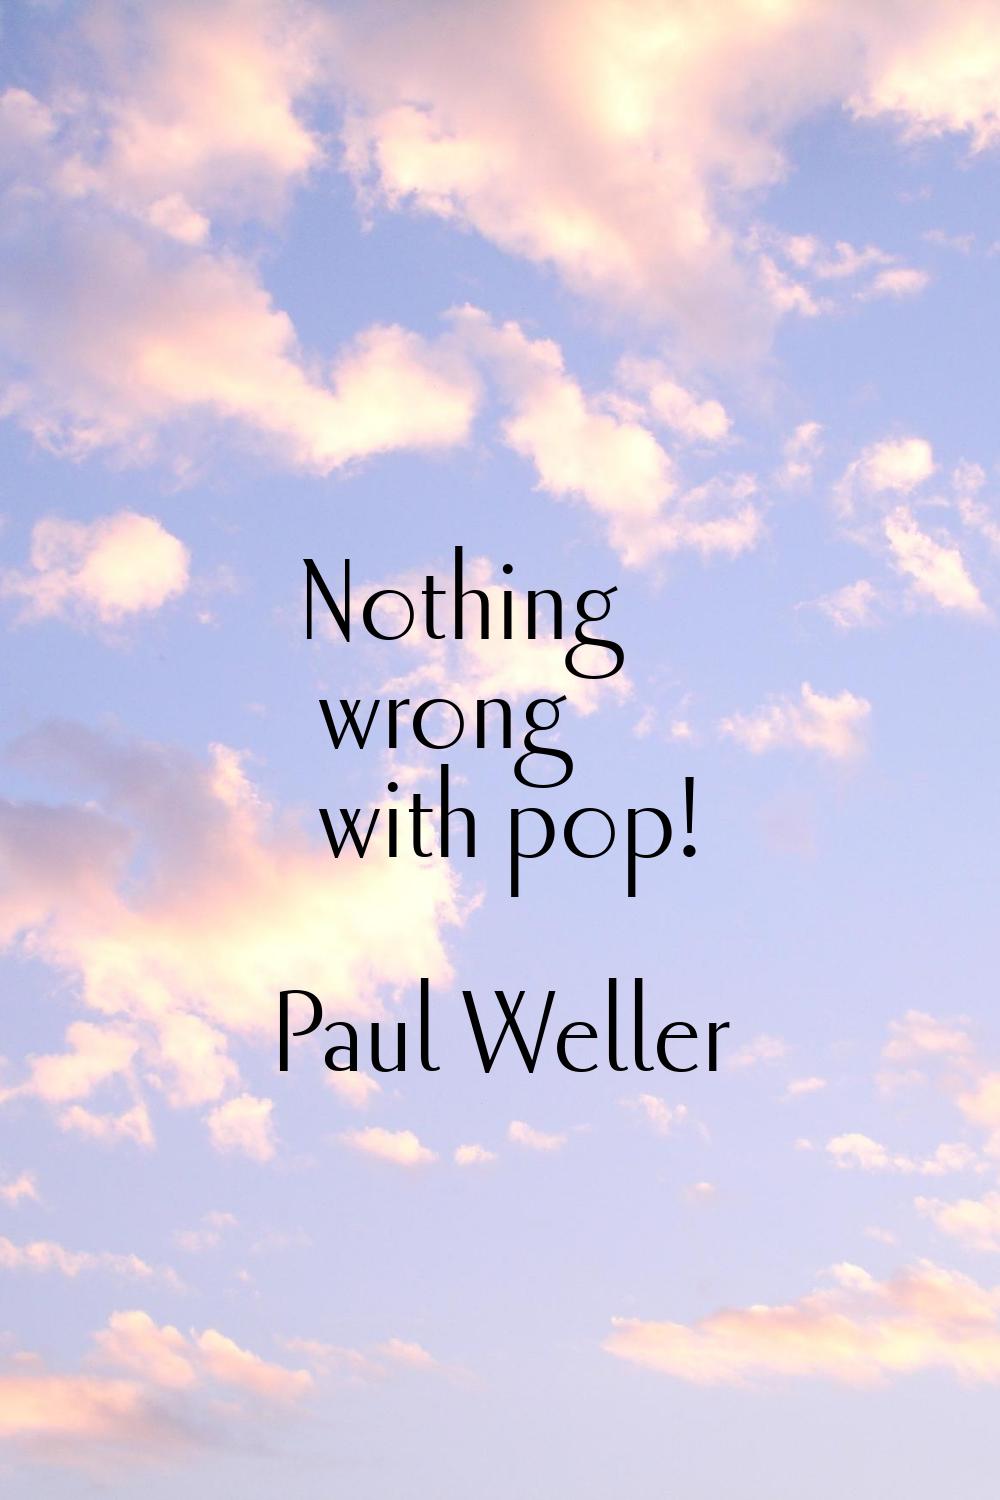 Nothing wrong with pop!